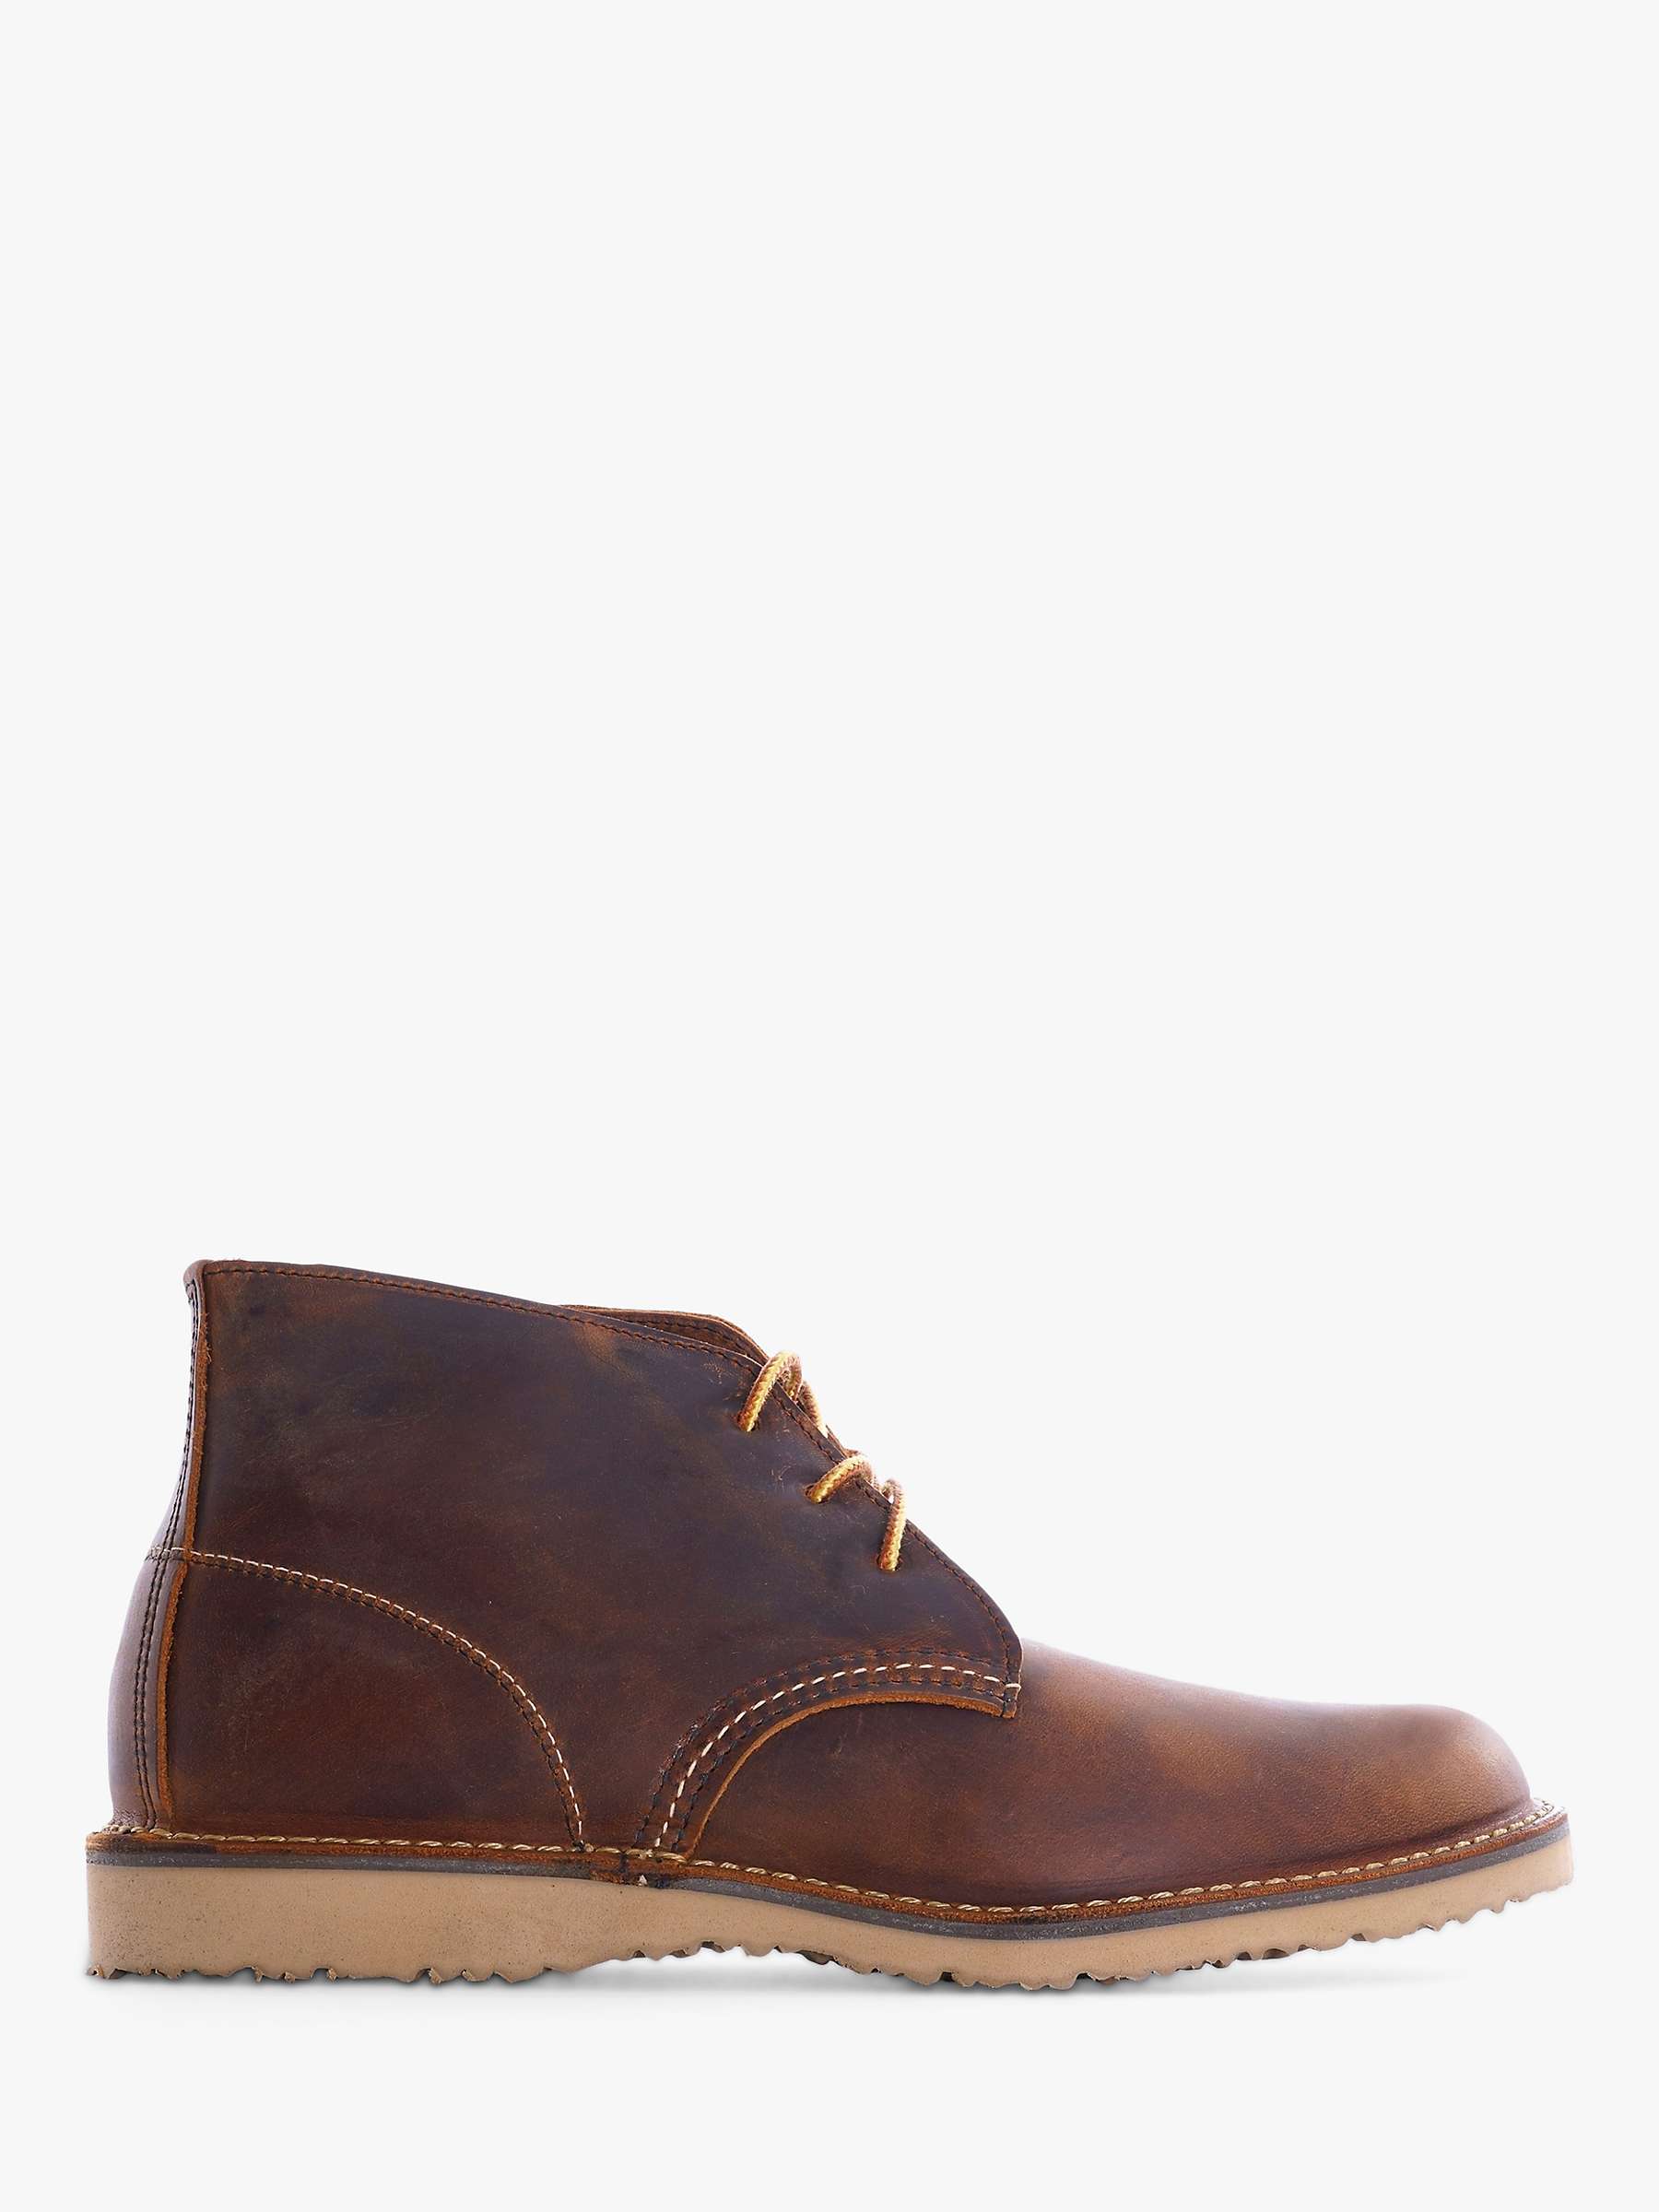 Buy Red Wing Weekender 3322 Chukka Boots, Copper Online at johnlewis.com